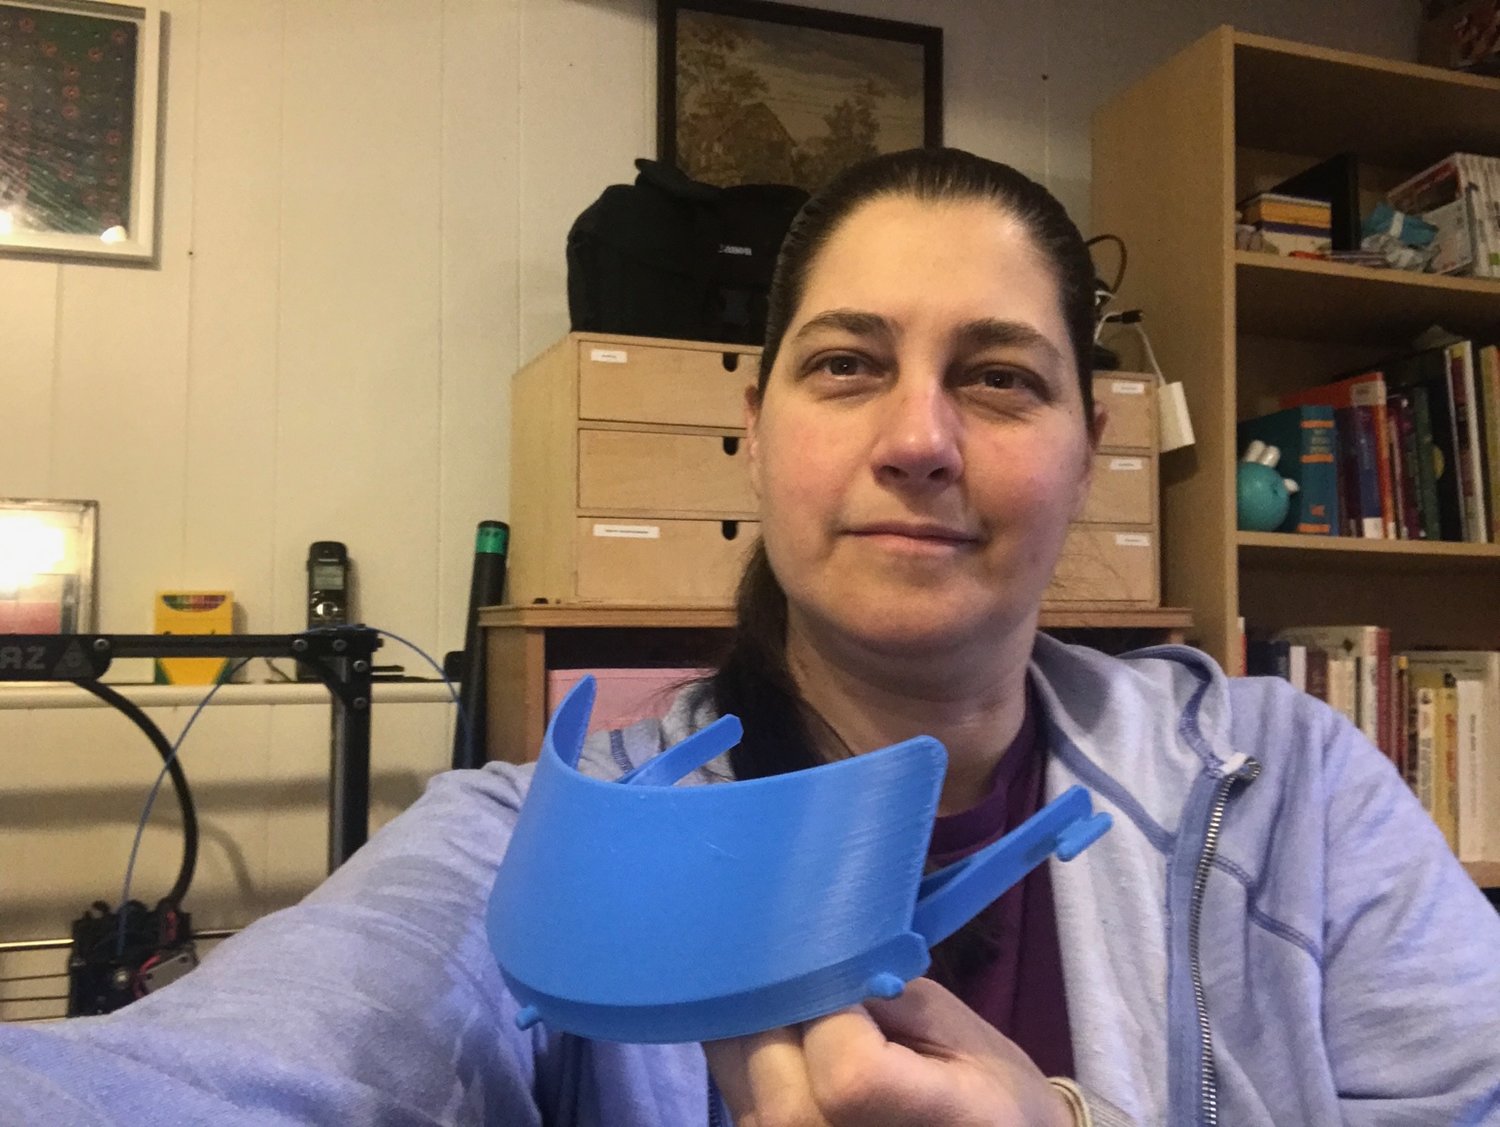 Lynn Voltaggio, a tech ed teacher in the district, is also making face shields in her home with the schools’ 3D printers.